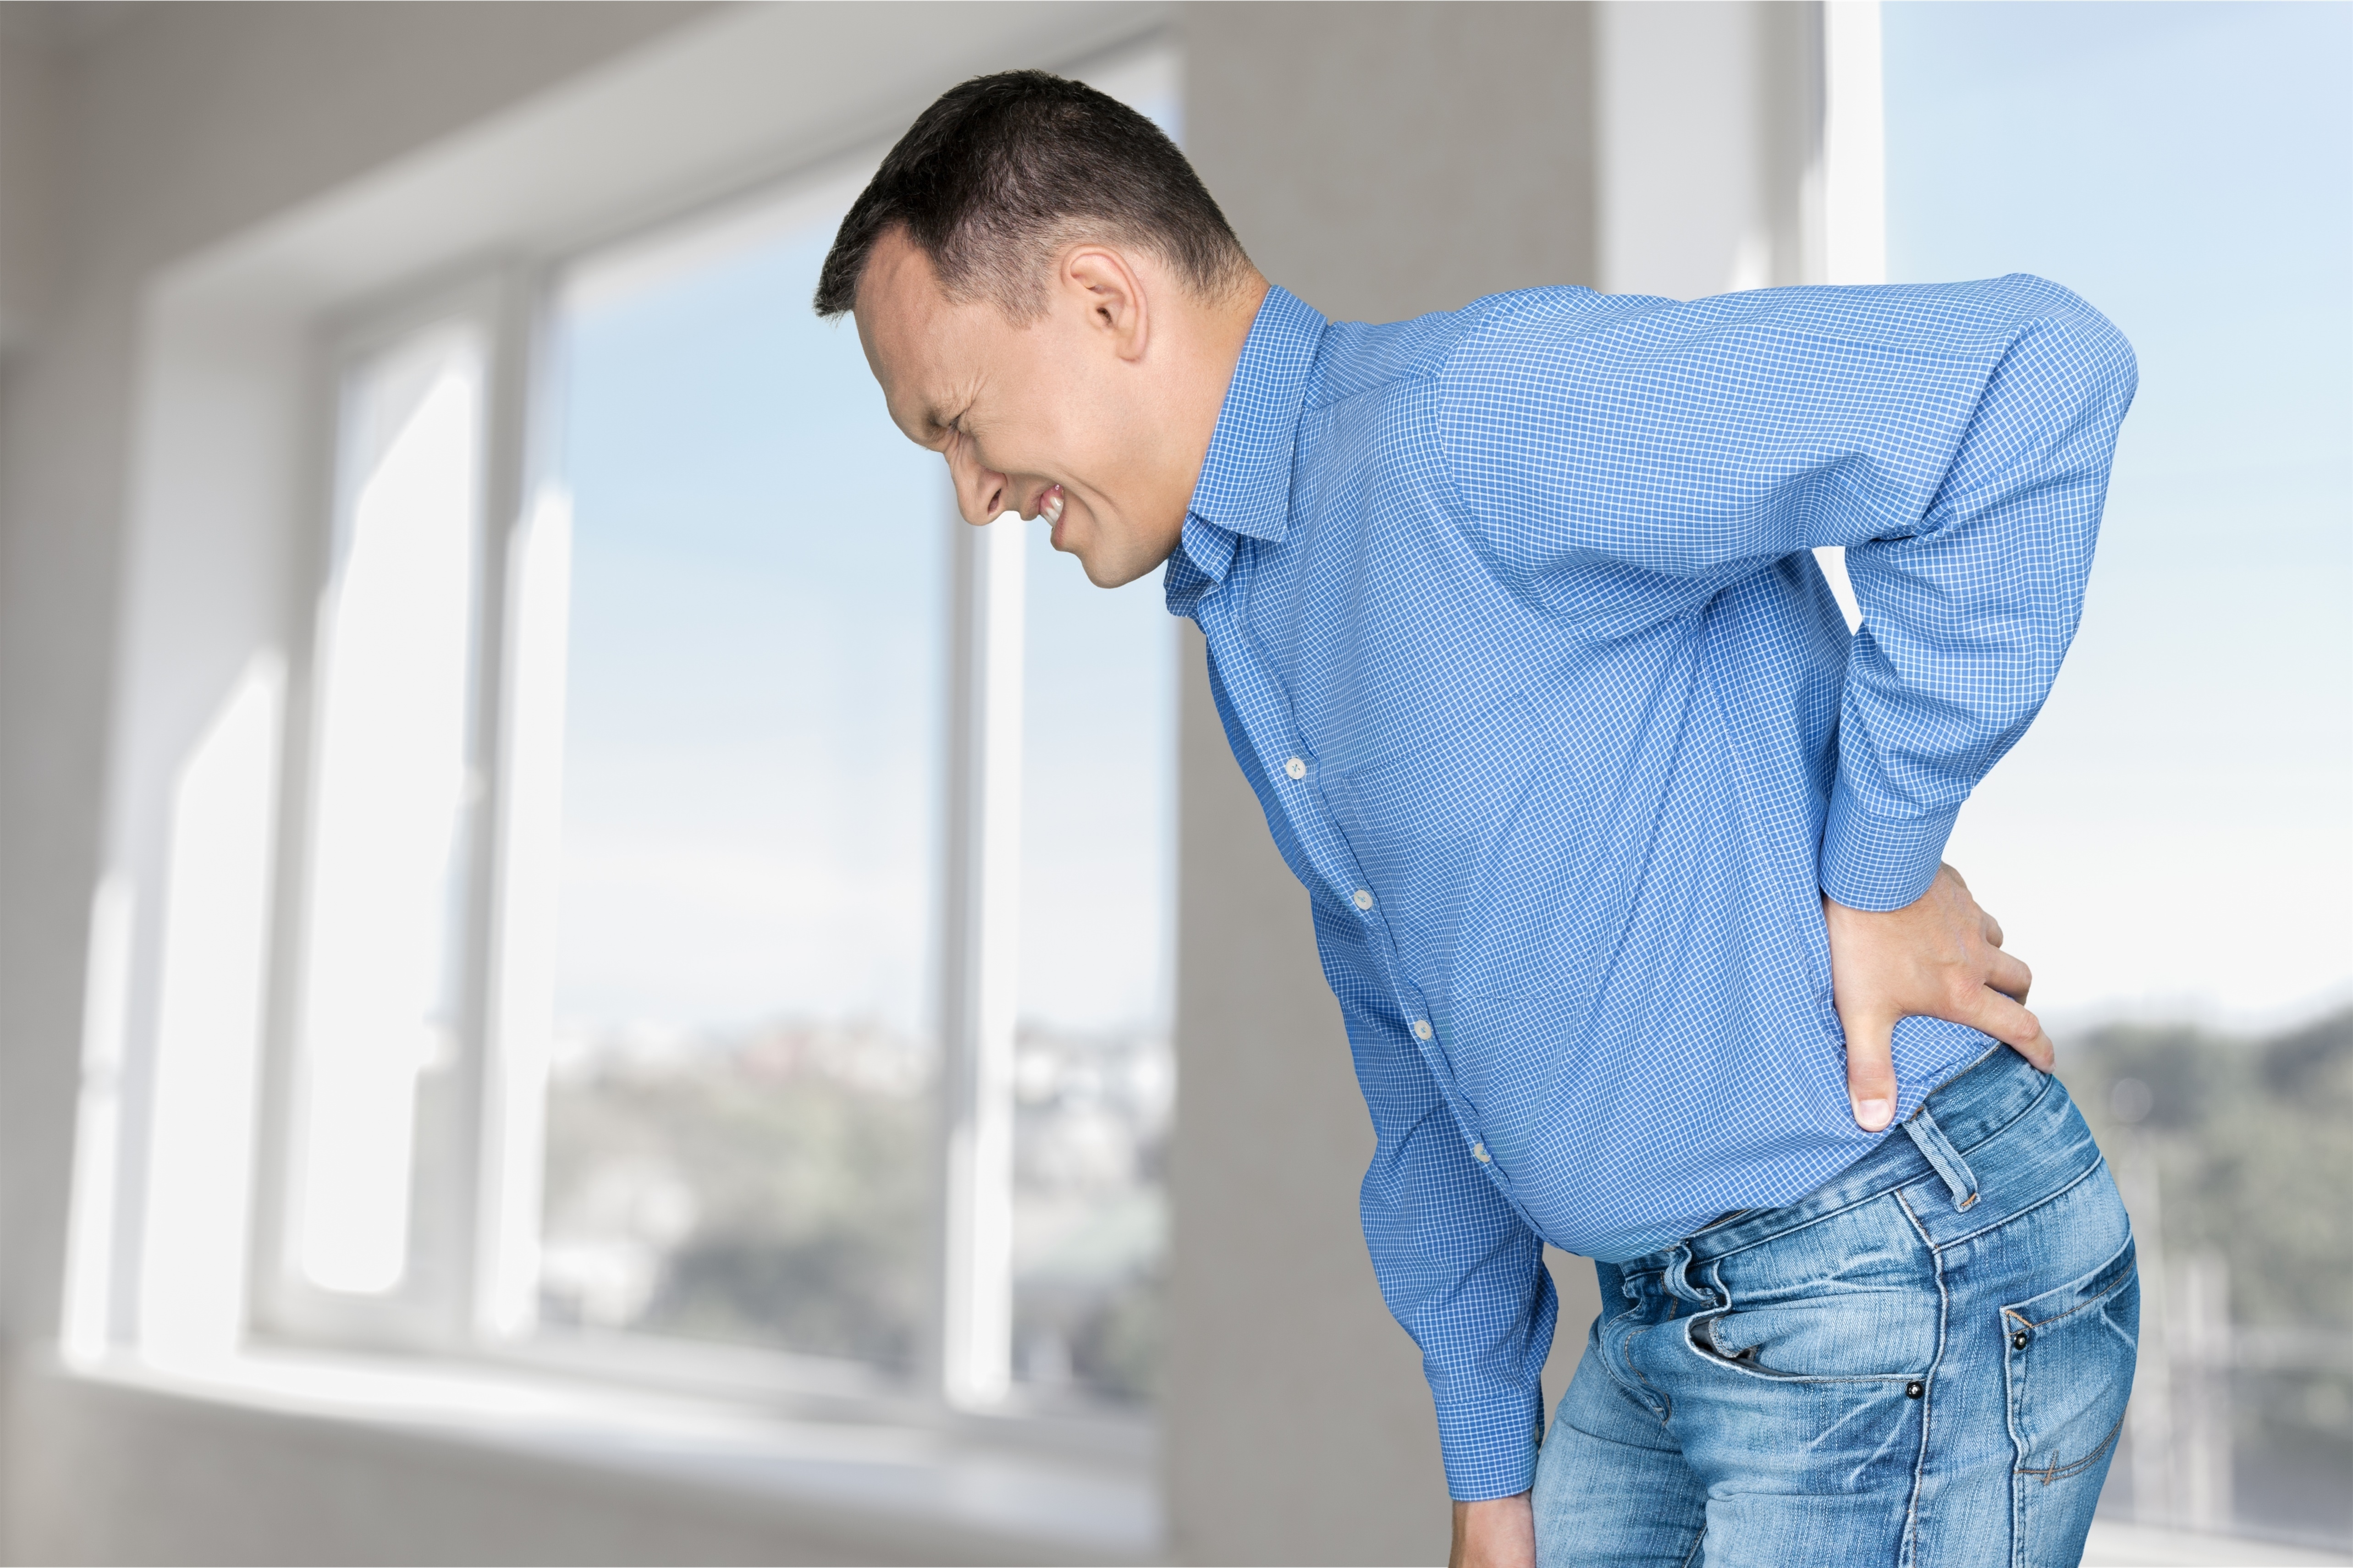 Man bent over with pain in lower back